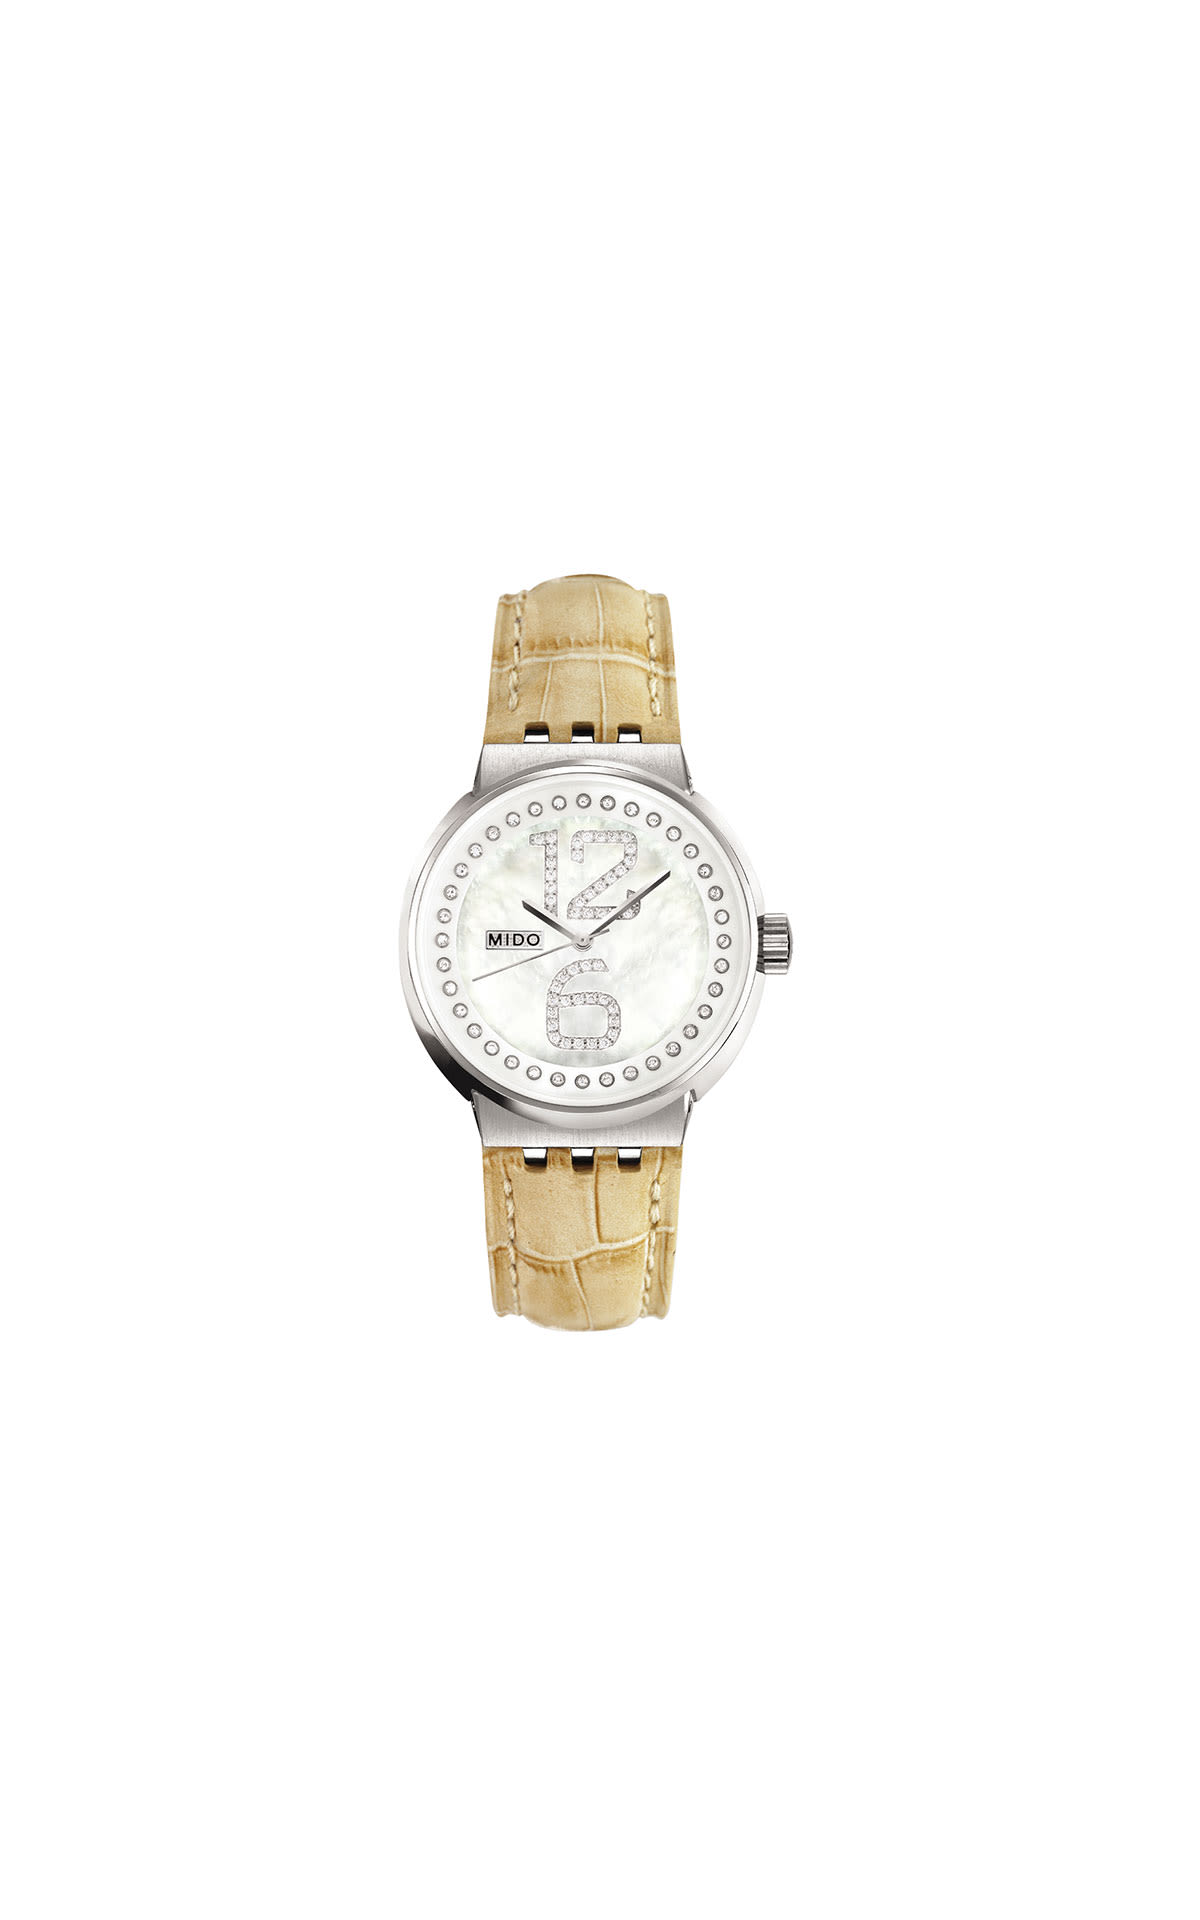 Hour Passion Mido Diamond Alldial Mechanical  from Bicester Village